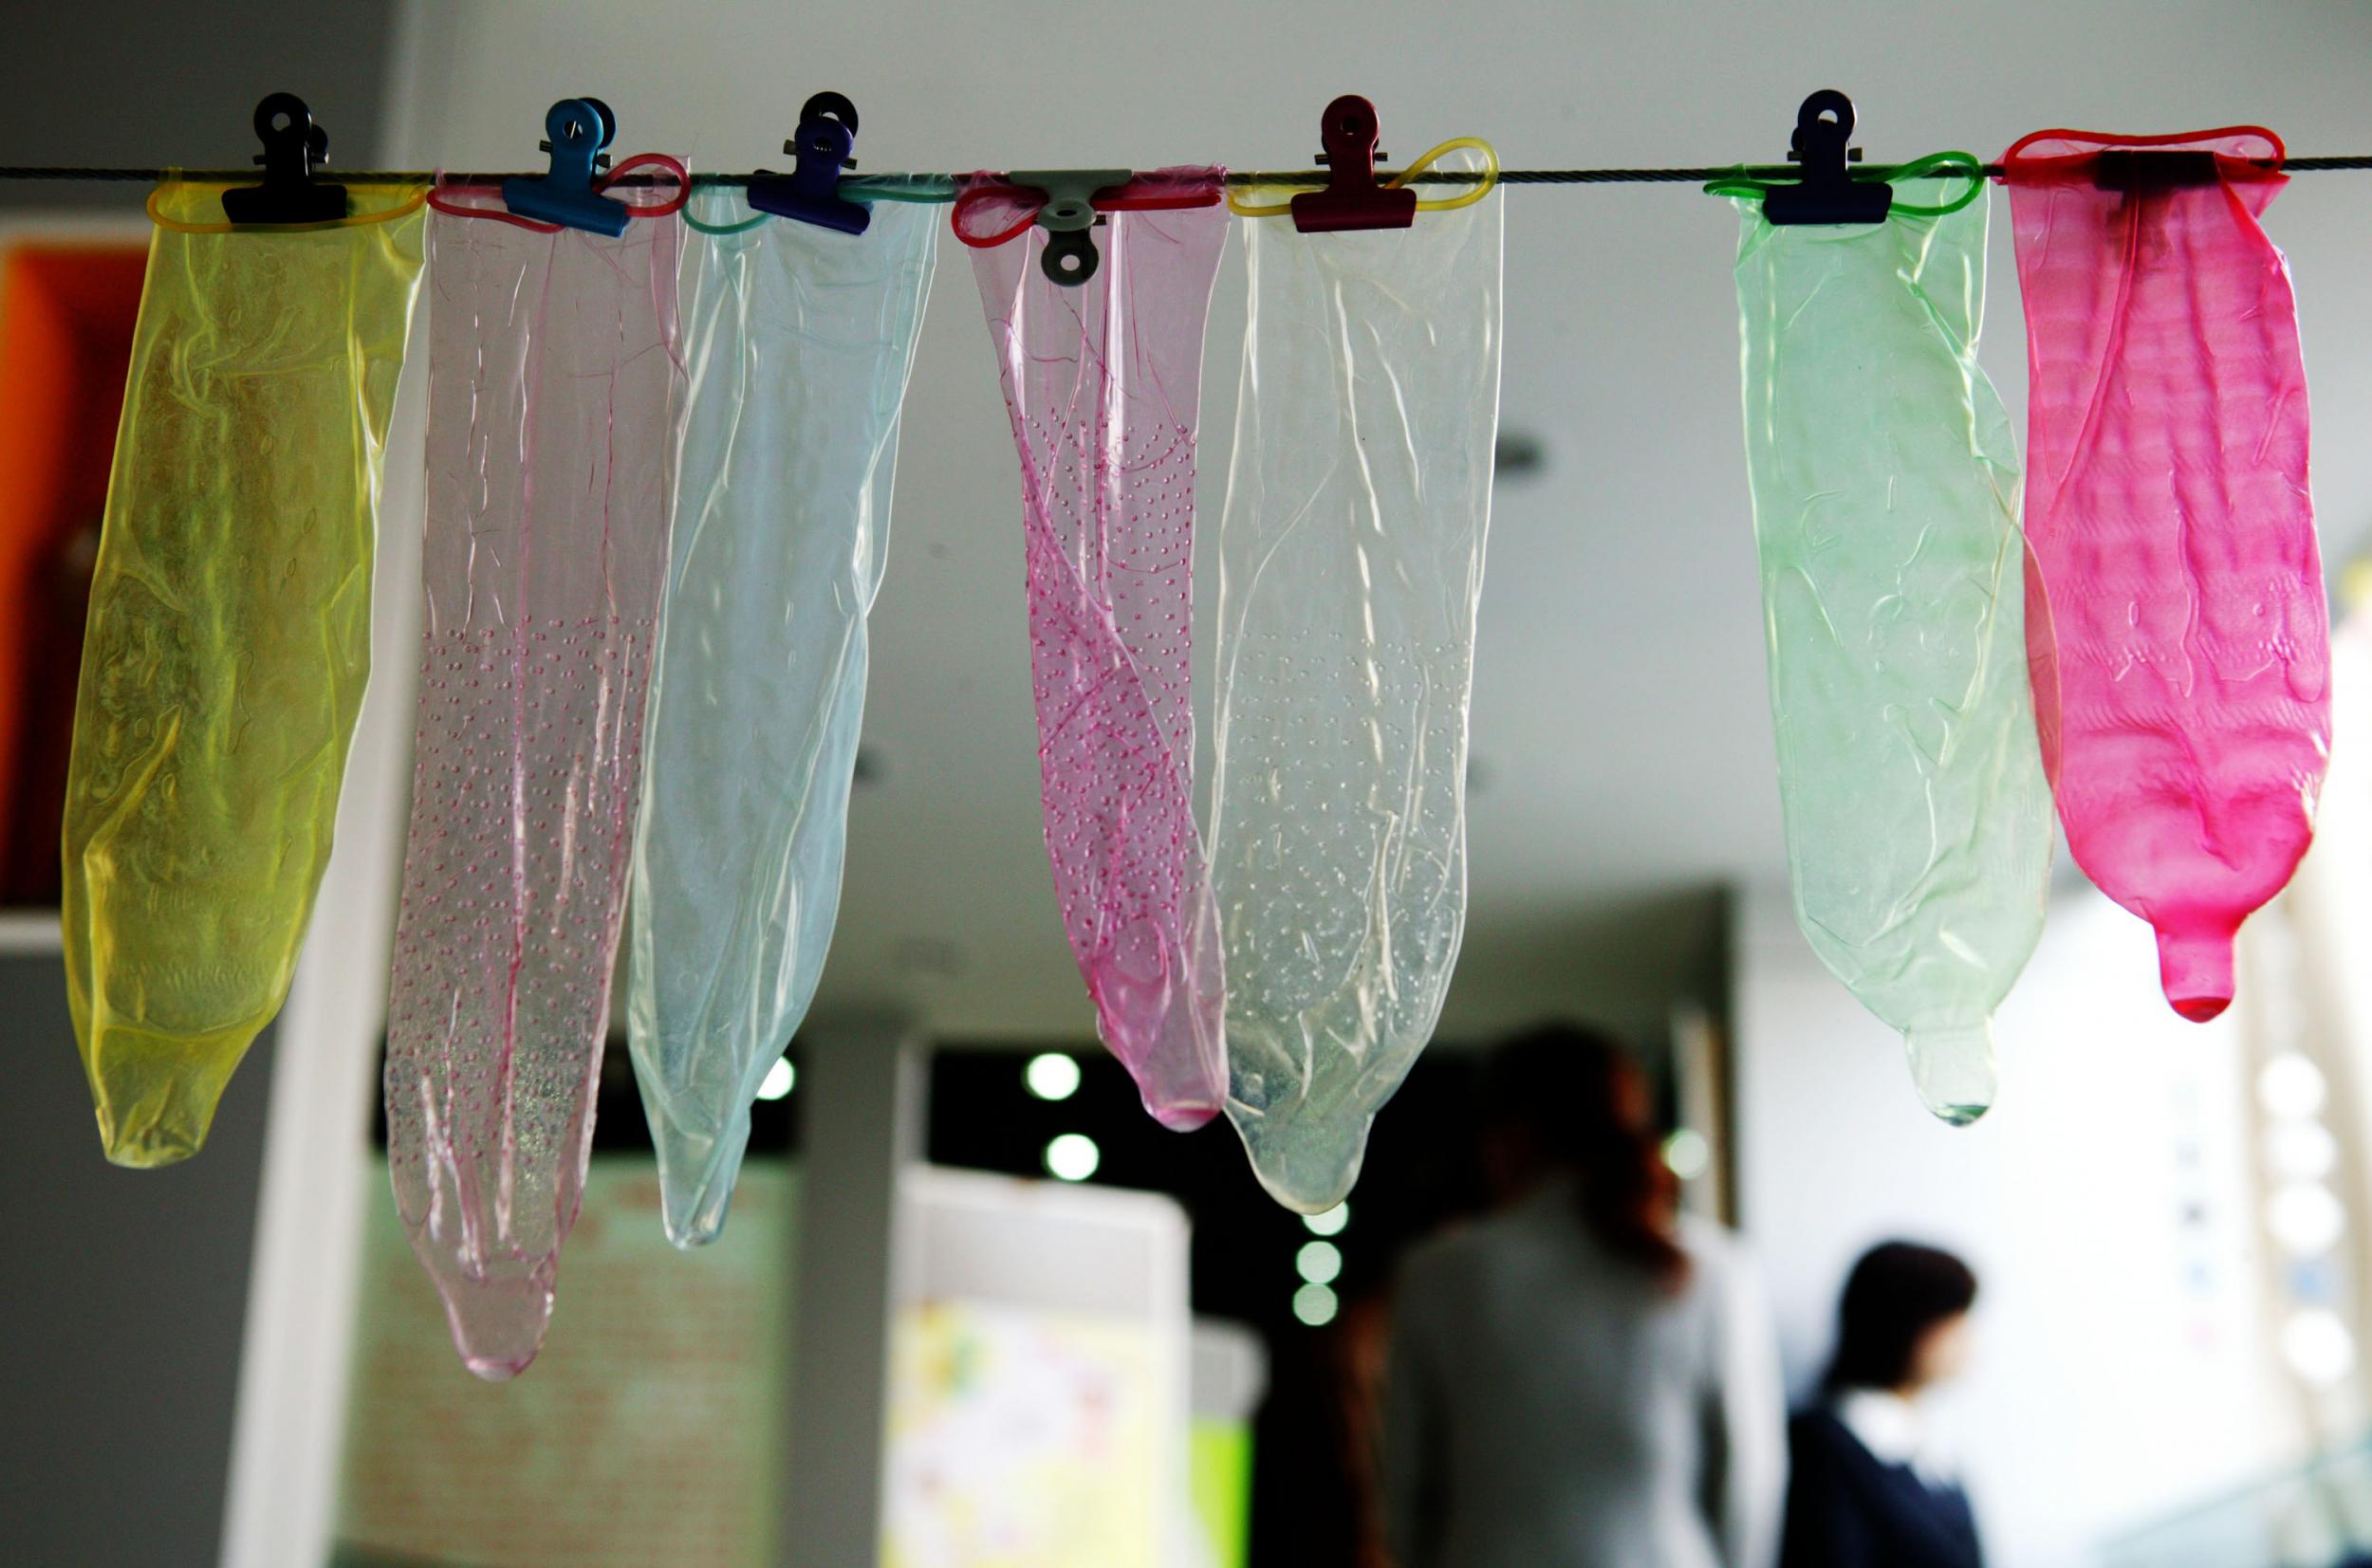 Condoms on show at an exhibition in China